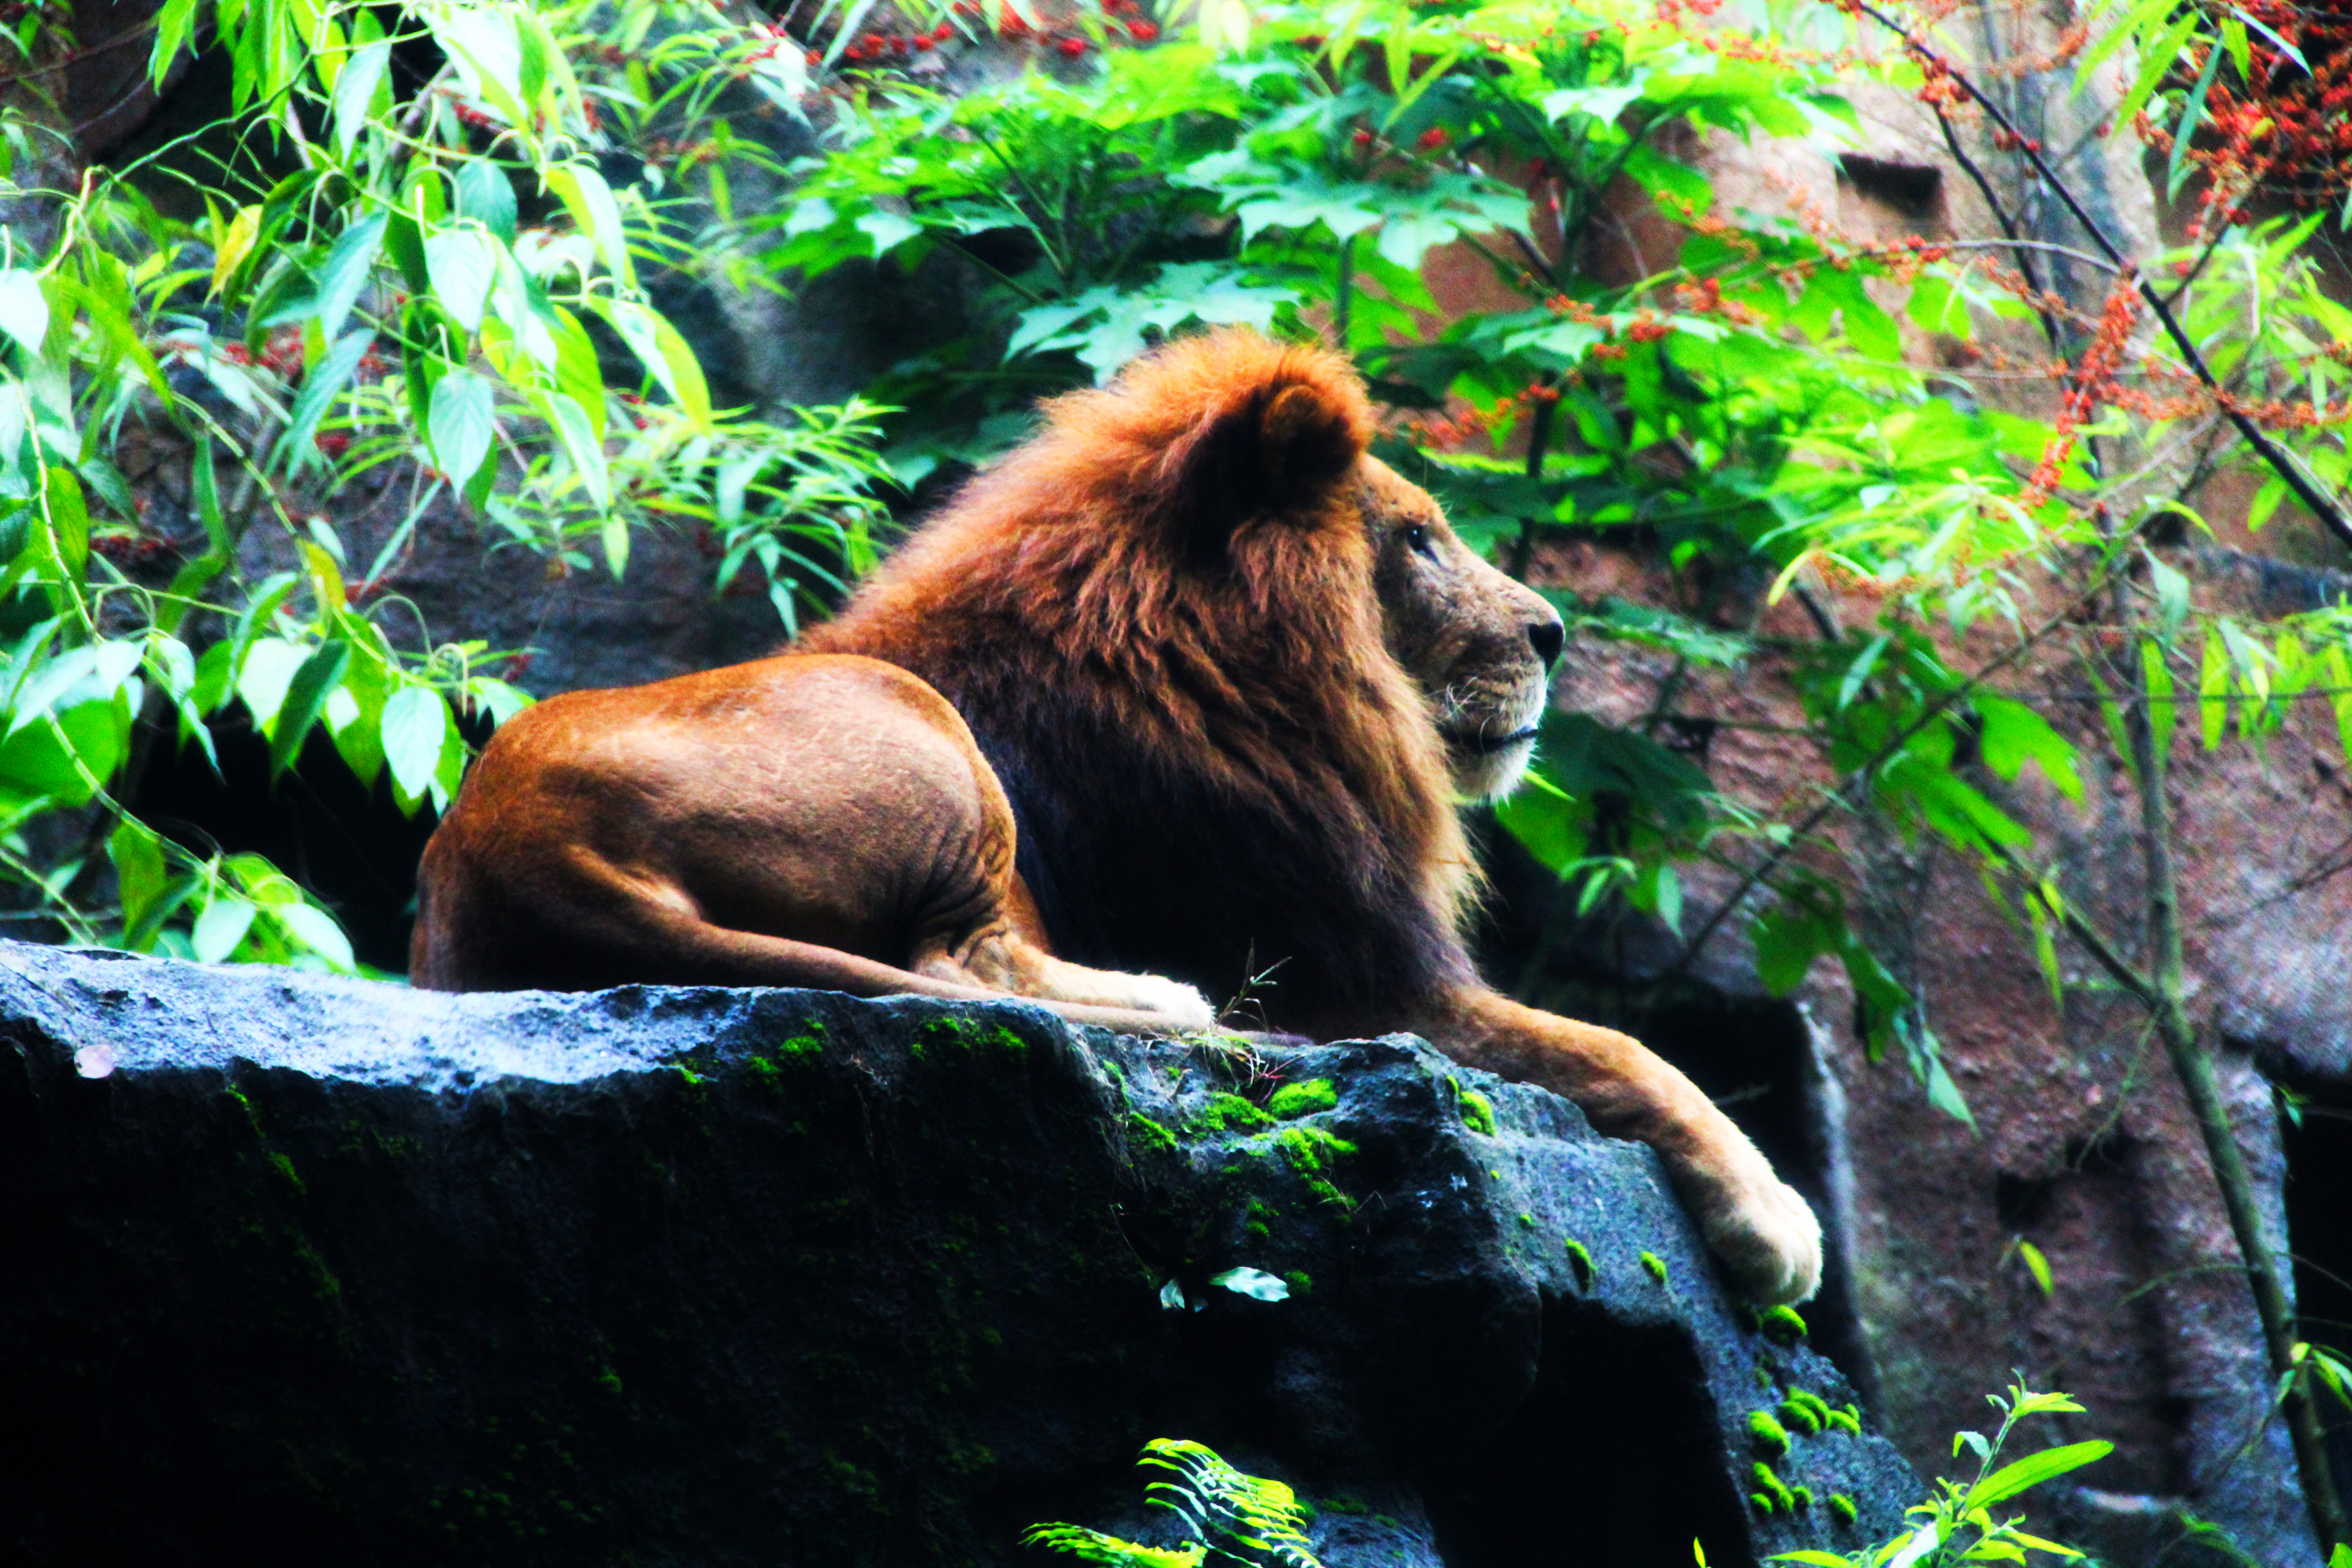 King of the jungle photo